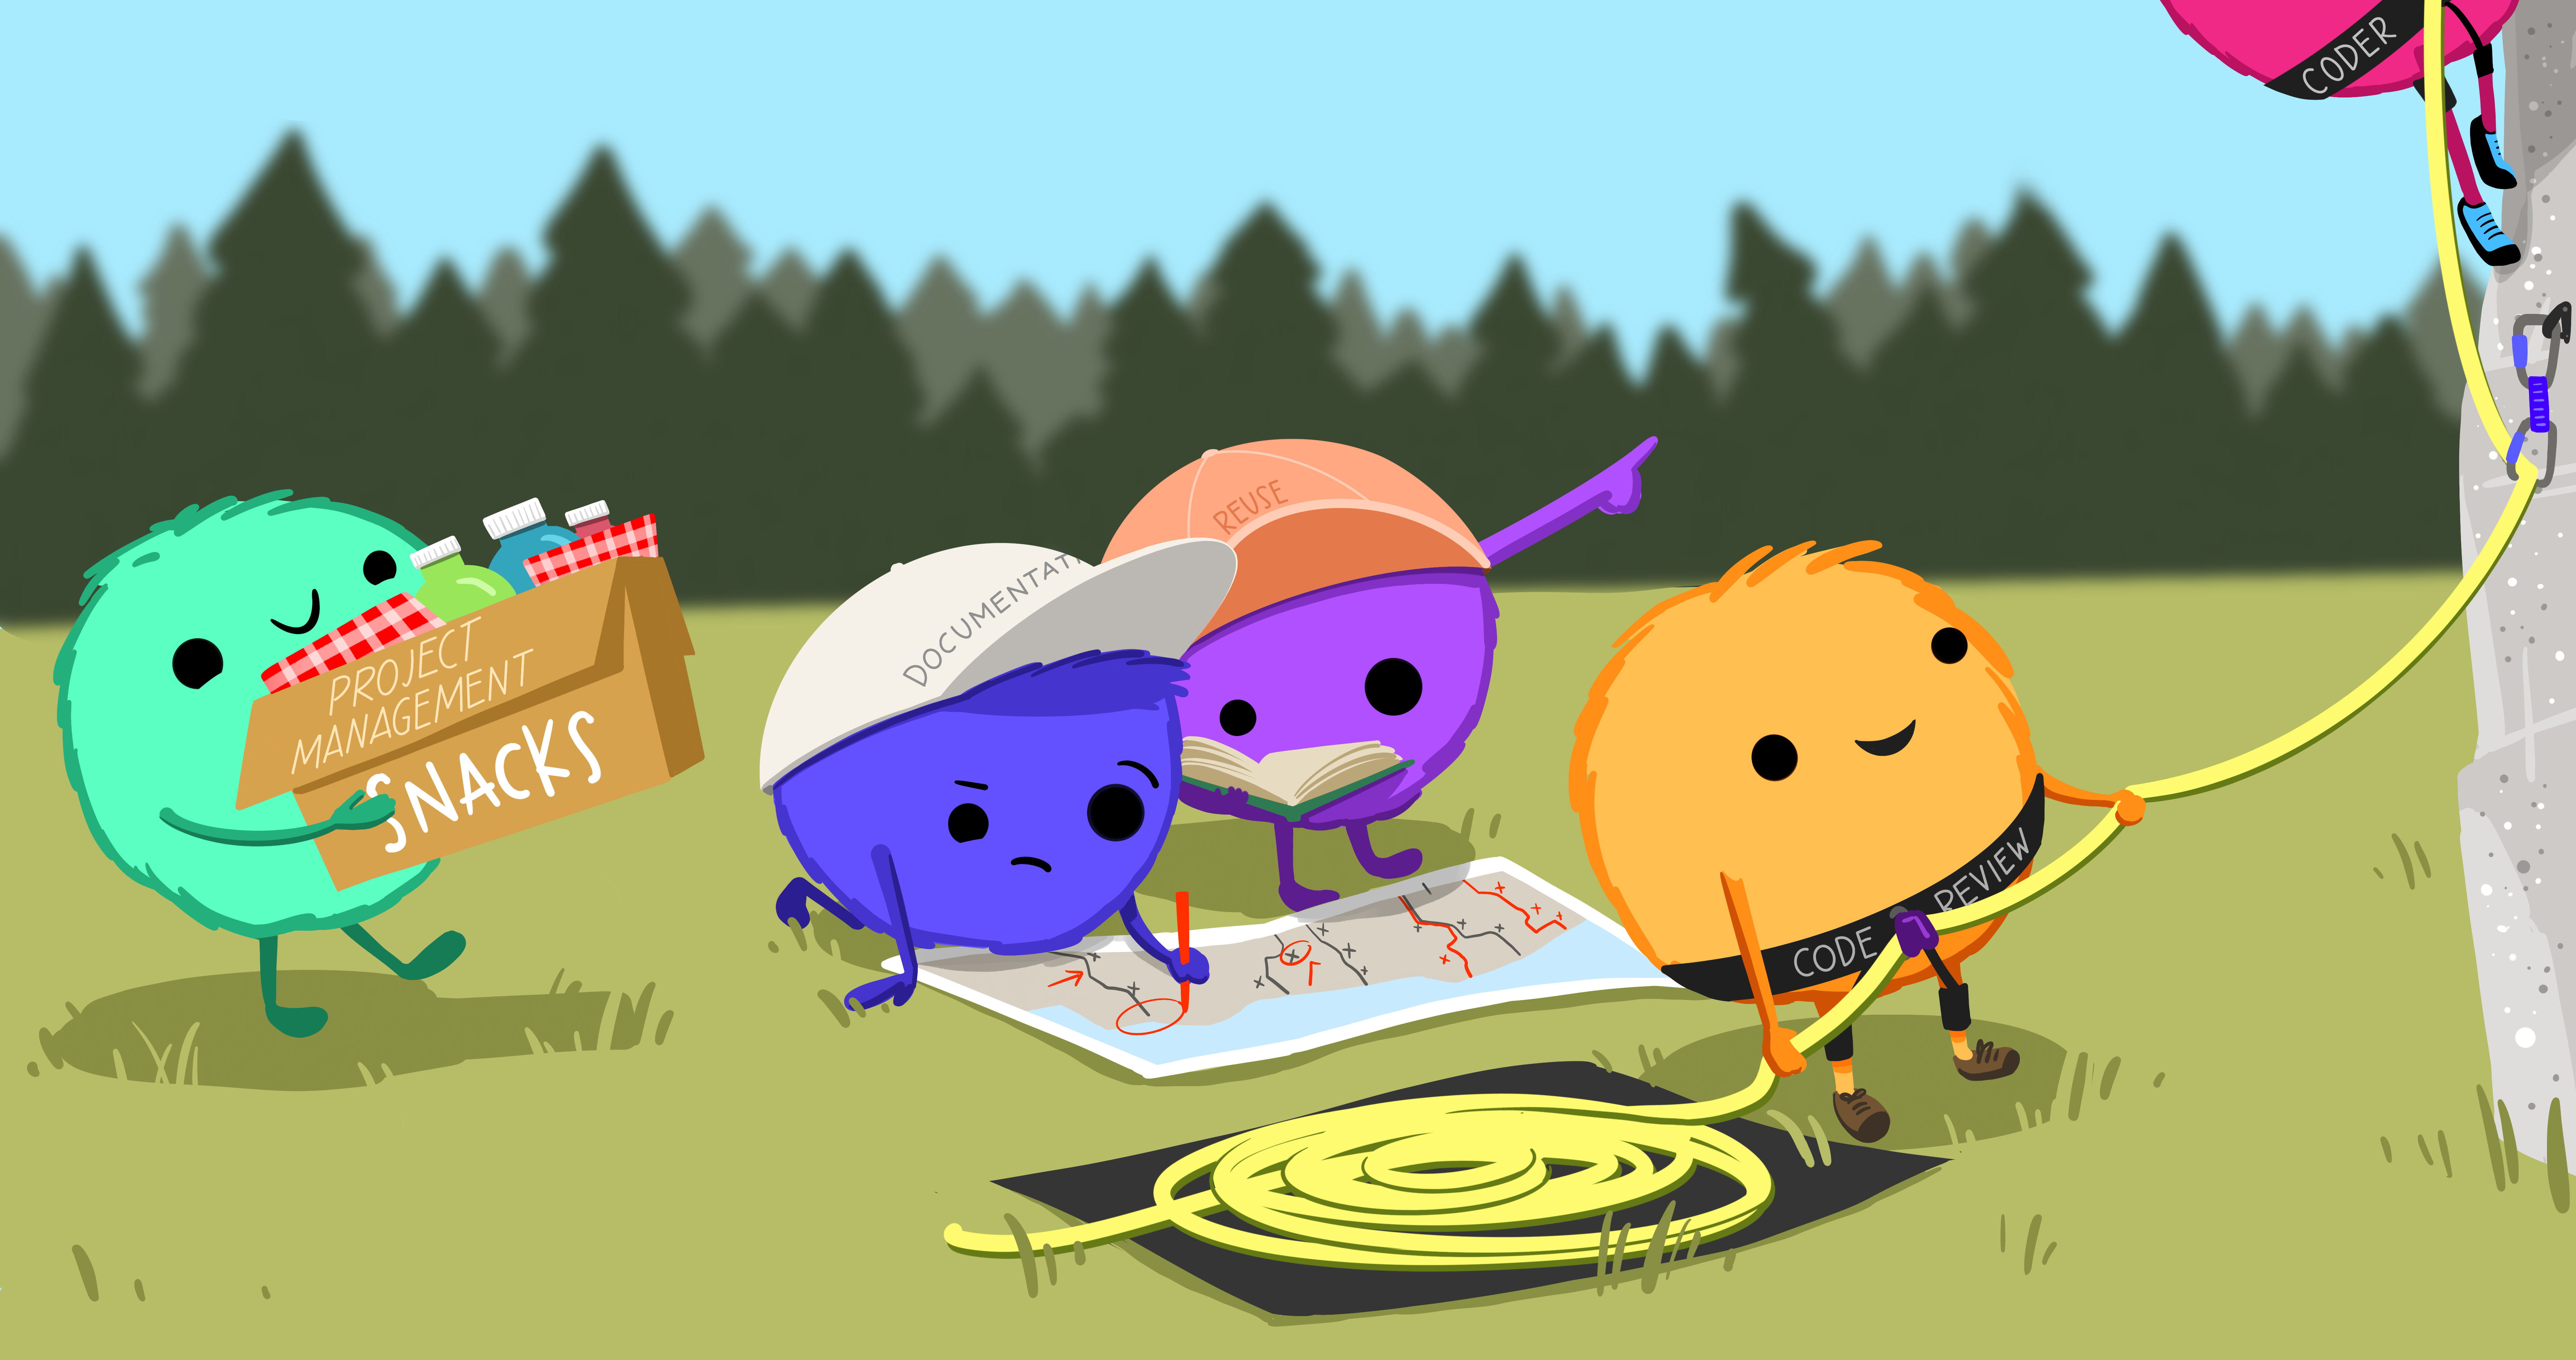 Four little monsters on grass support another monster starting their climb up a rock face. The climber's harness is labeled, 'Coder', the belayer wears a harness labeled 'Code review', two others consulting a book and route map wear caps labeled 'Documentation' and 'Reuse', and another brings a box labeled 'Project management and snacks'.